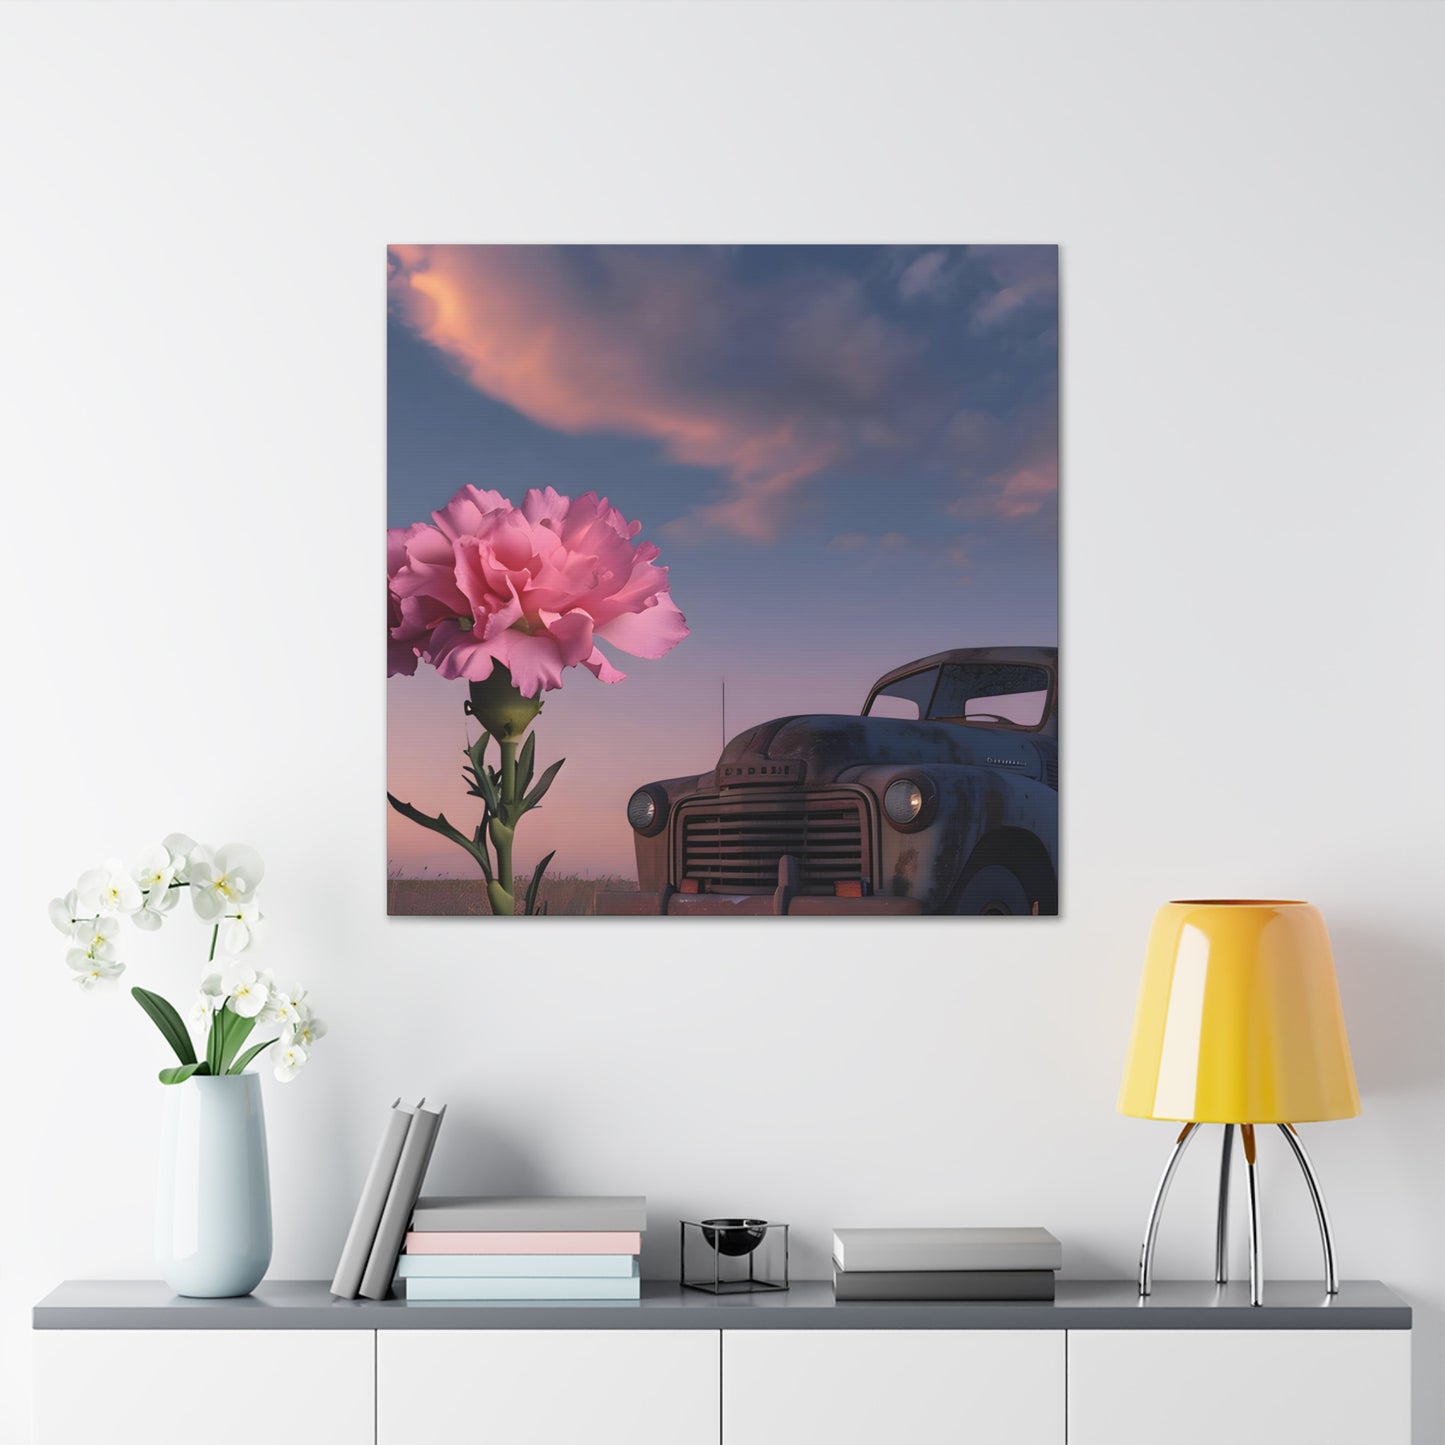 Harper Kelly. The Day the Music Bloomed. Exclusive Canvas Print